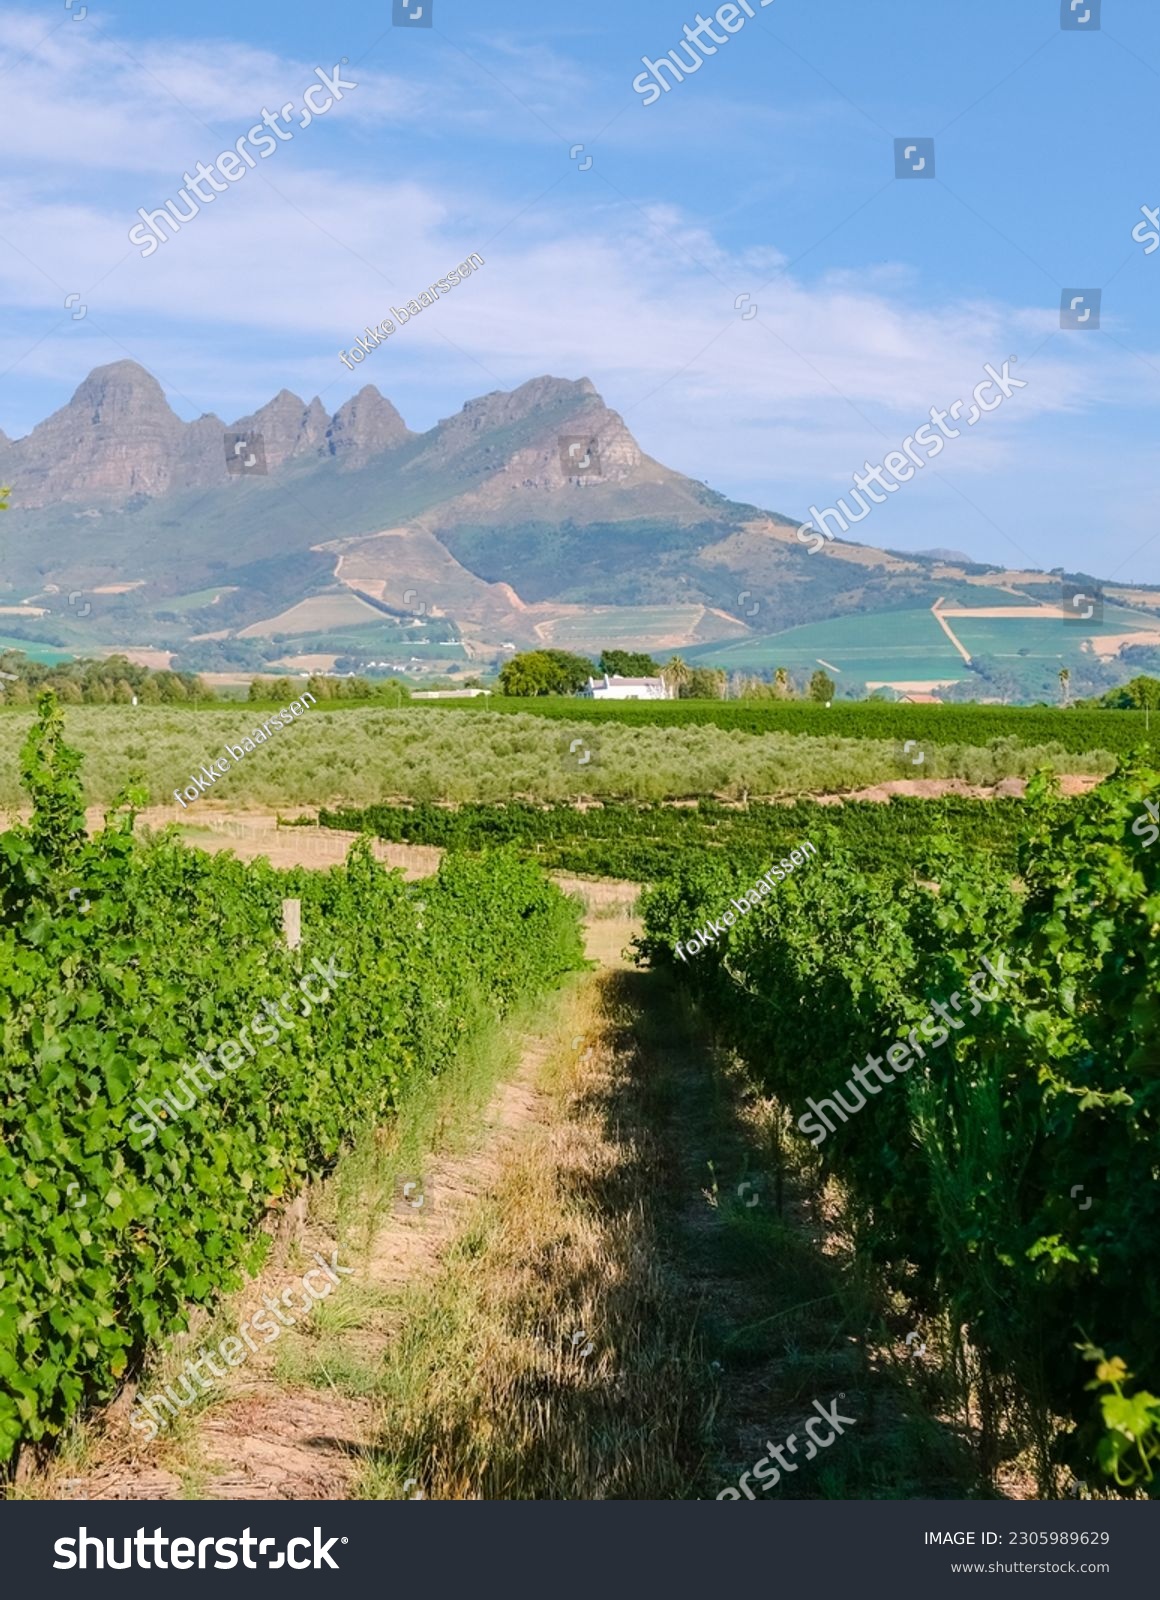 Vineyard landscape at sunset with mountains in Stellenbosch, near Cape Town, South Africa. wine grapes on the vine in the vineyard Western Cape South Africa during summer #2305989629